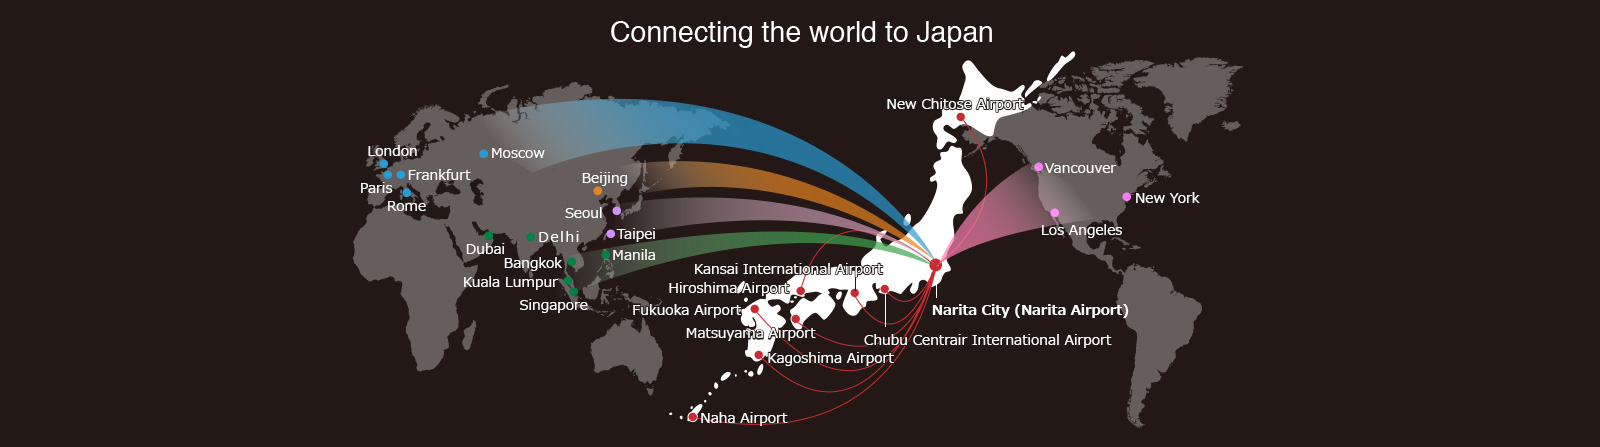 Connecting the world to Japan